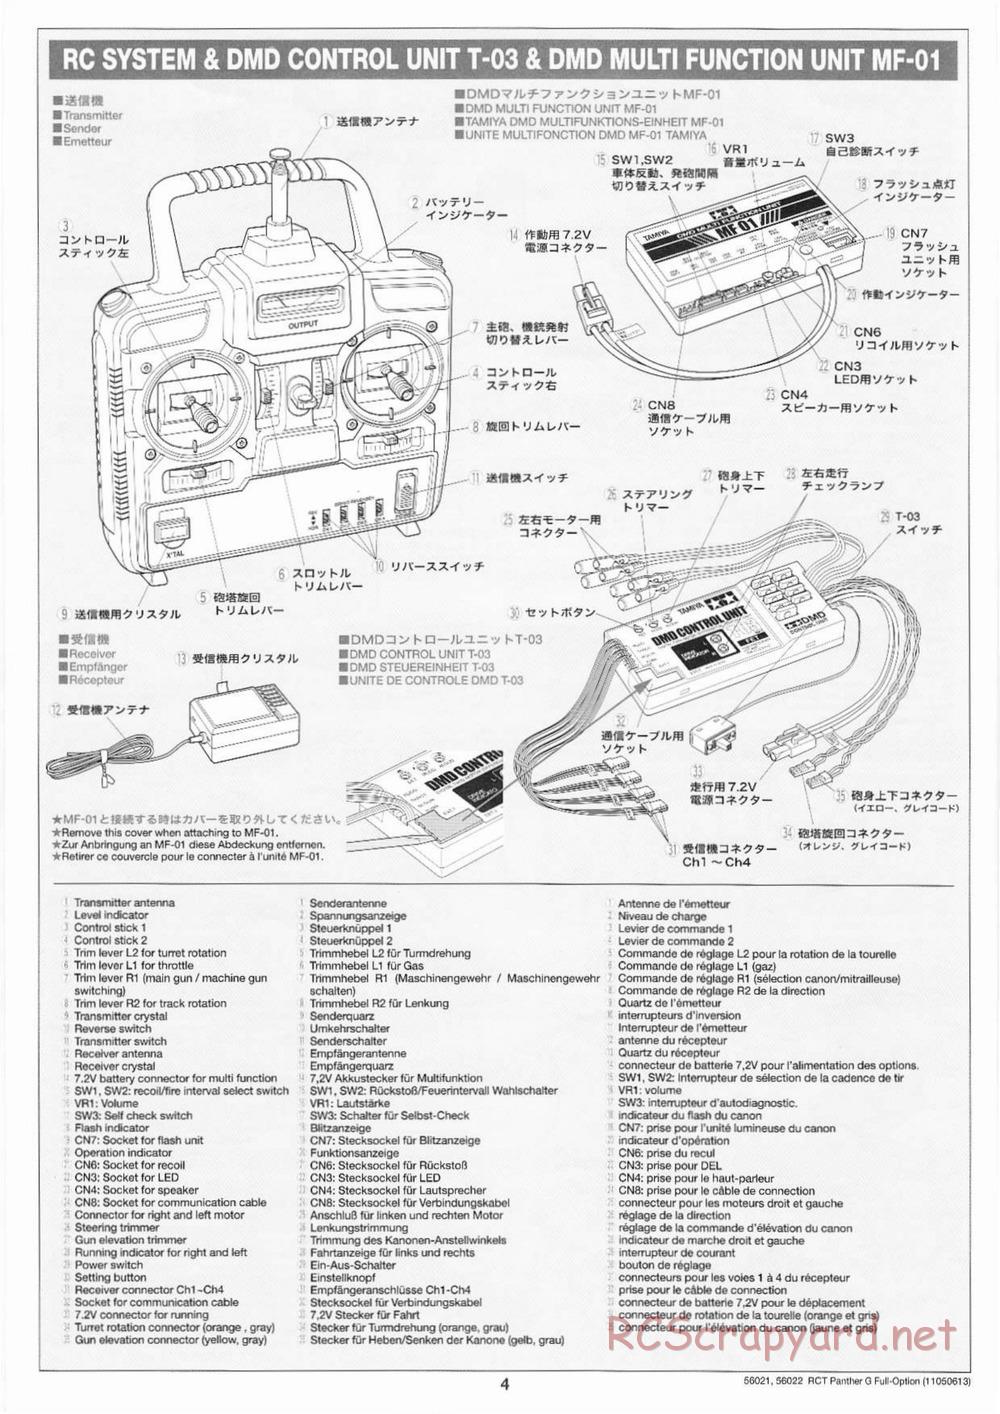 Tamiya - Panther Type G - 1/16 Scale Chassis - Manual - Page 4